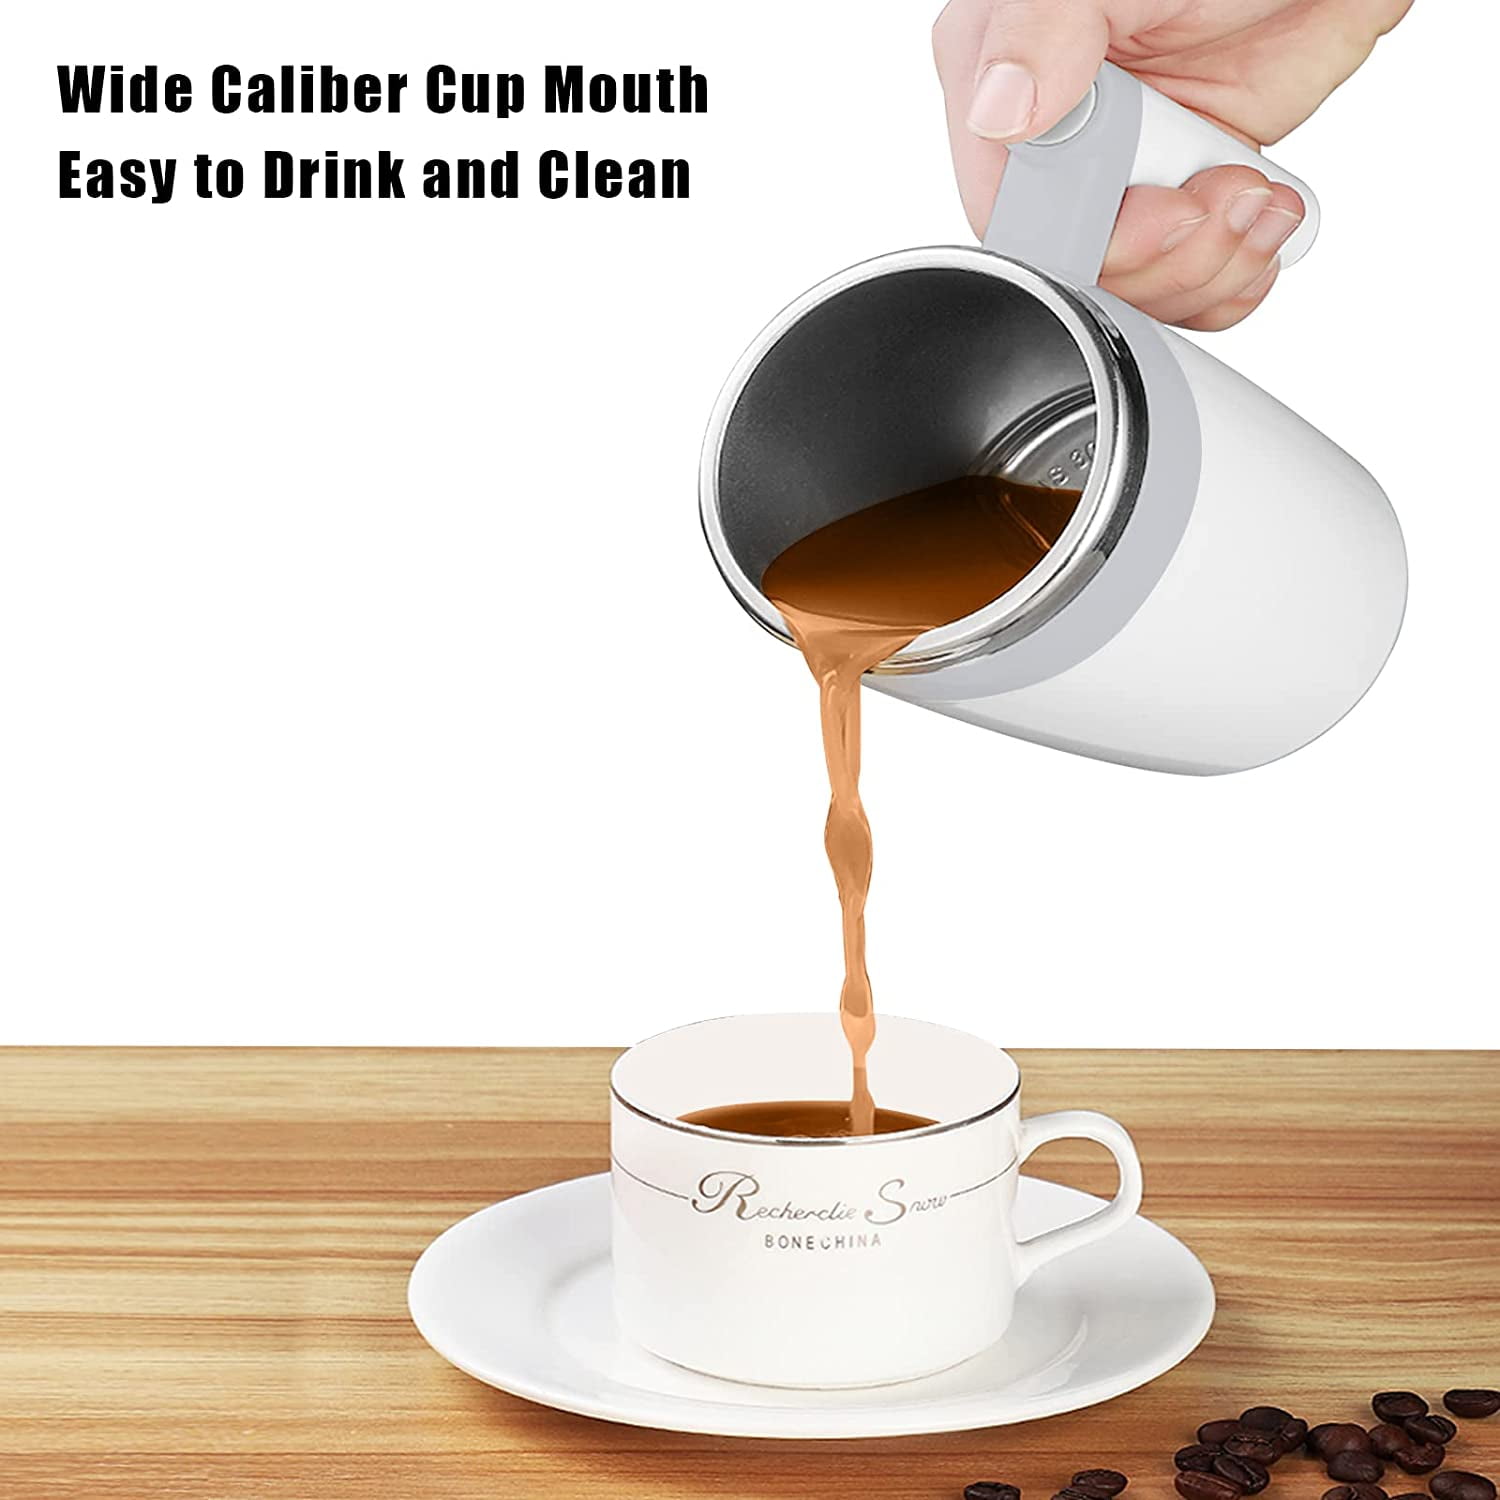 Self stirring coffee mug - Automatic mixing stainless steel cup - To stir  your coffee, tea, hot chocolate, milk, protein shake, bouillon, etc. -  Ideal